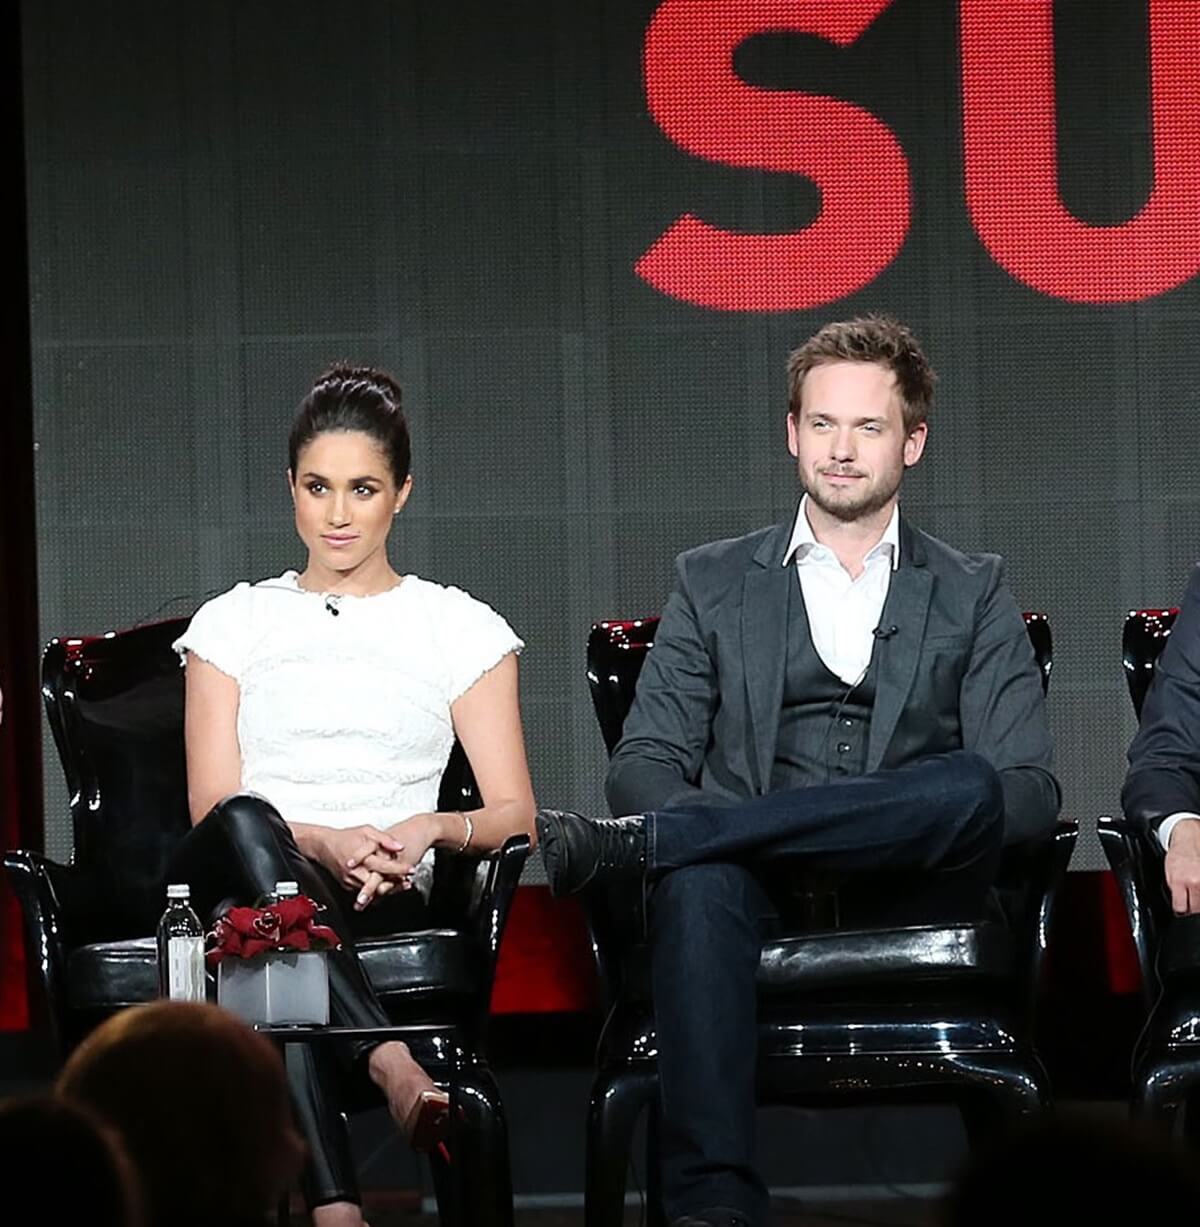 Meghan Markle and Patrick J. Adams onstage during the NBC Universal portion of the 2014 Winter Television Critics Association Press Tour